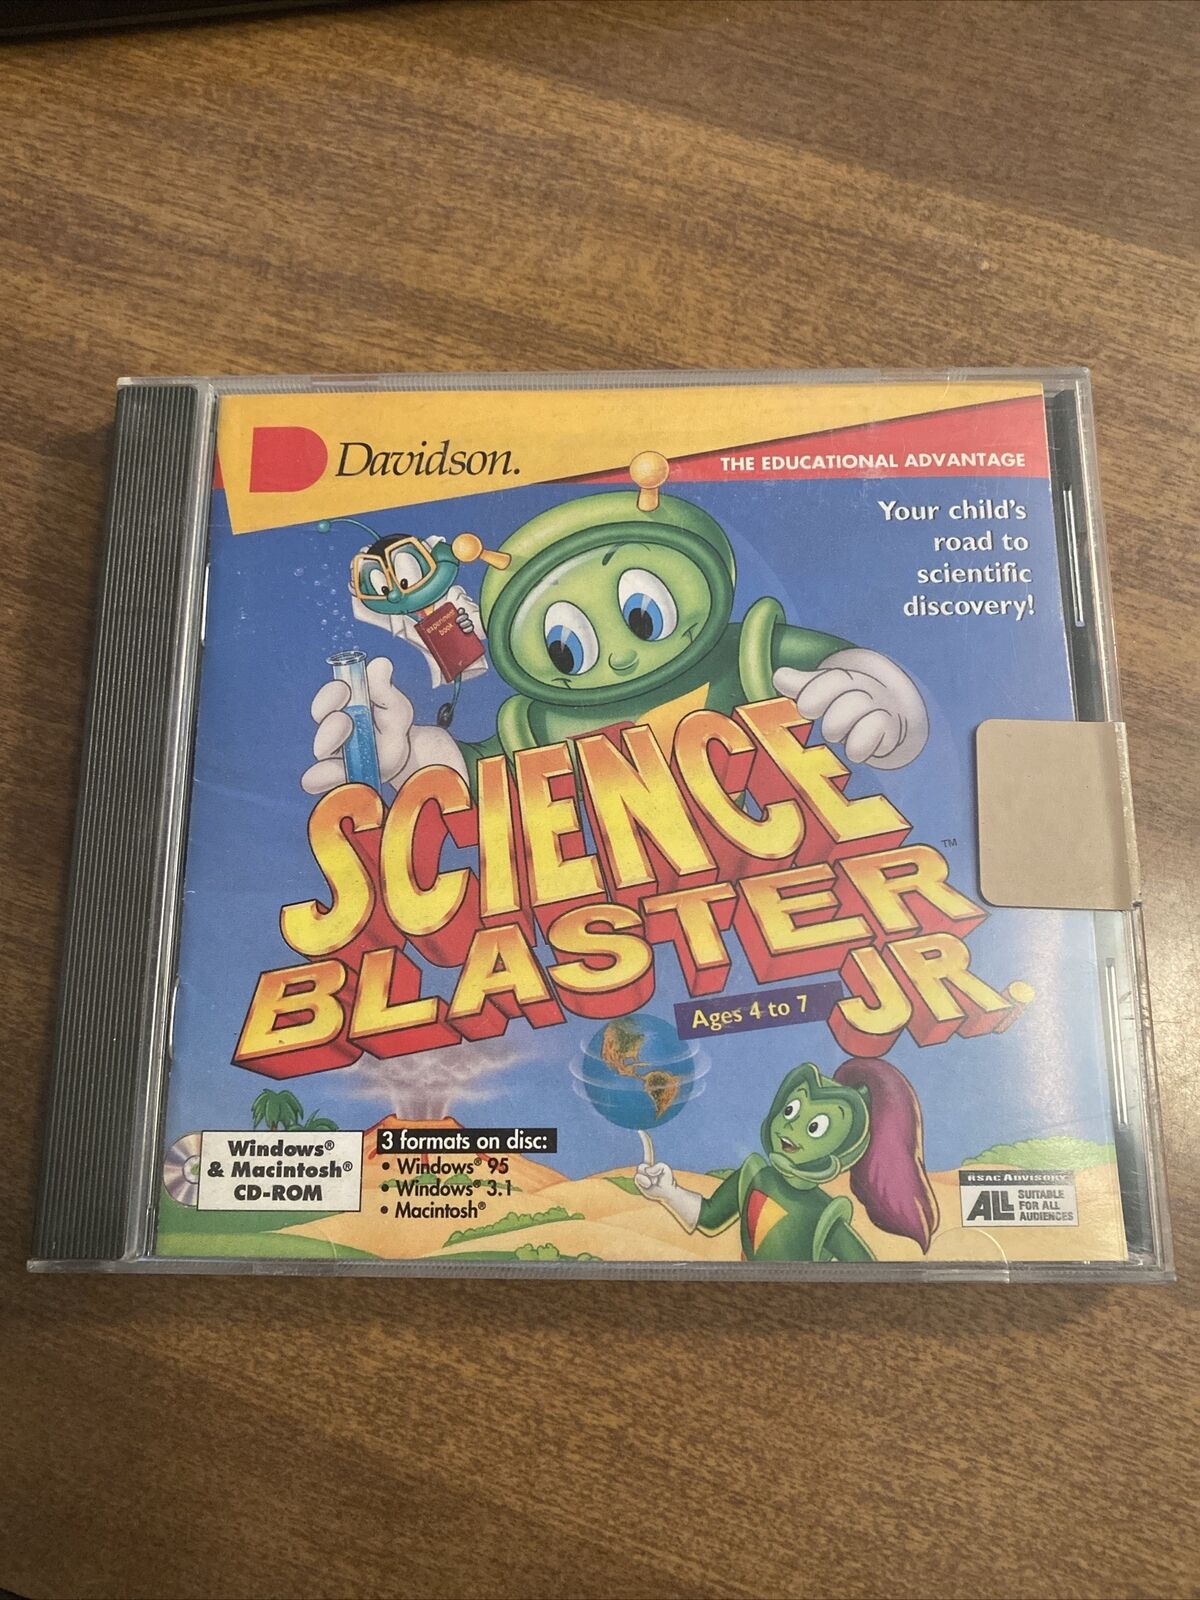 Science Blaster Jr.-windows with manual